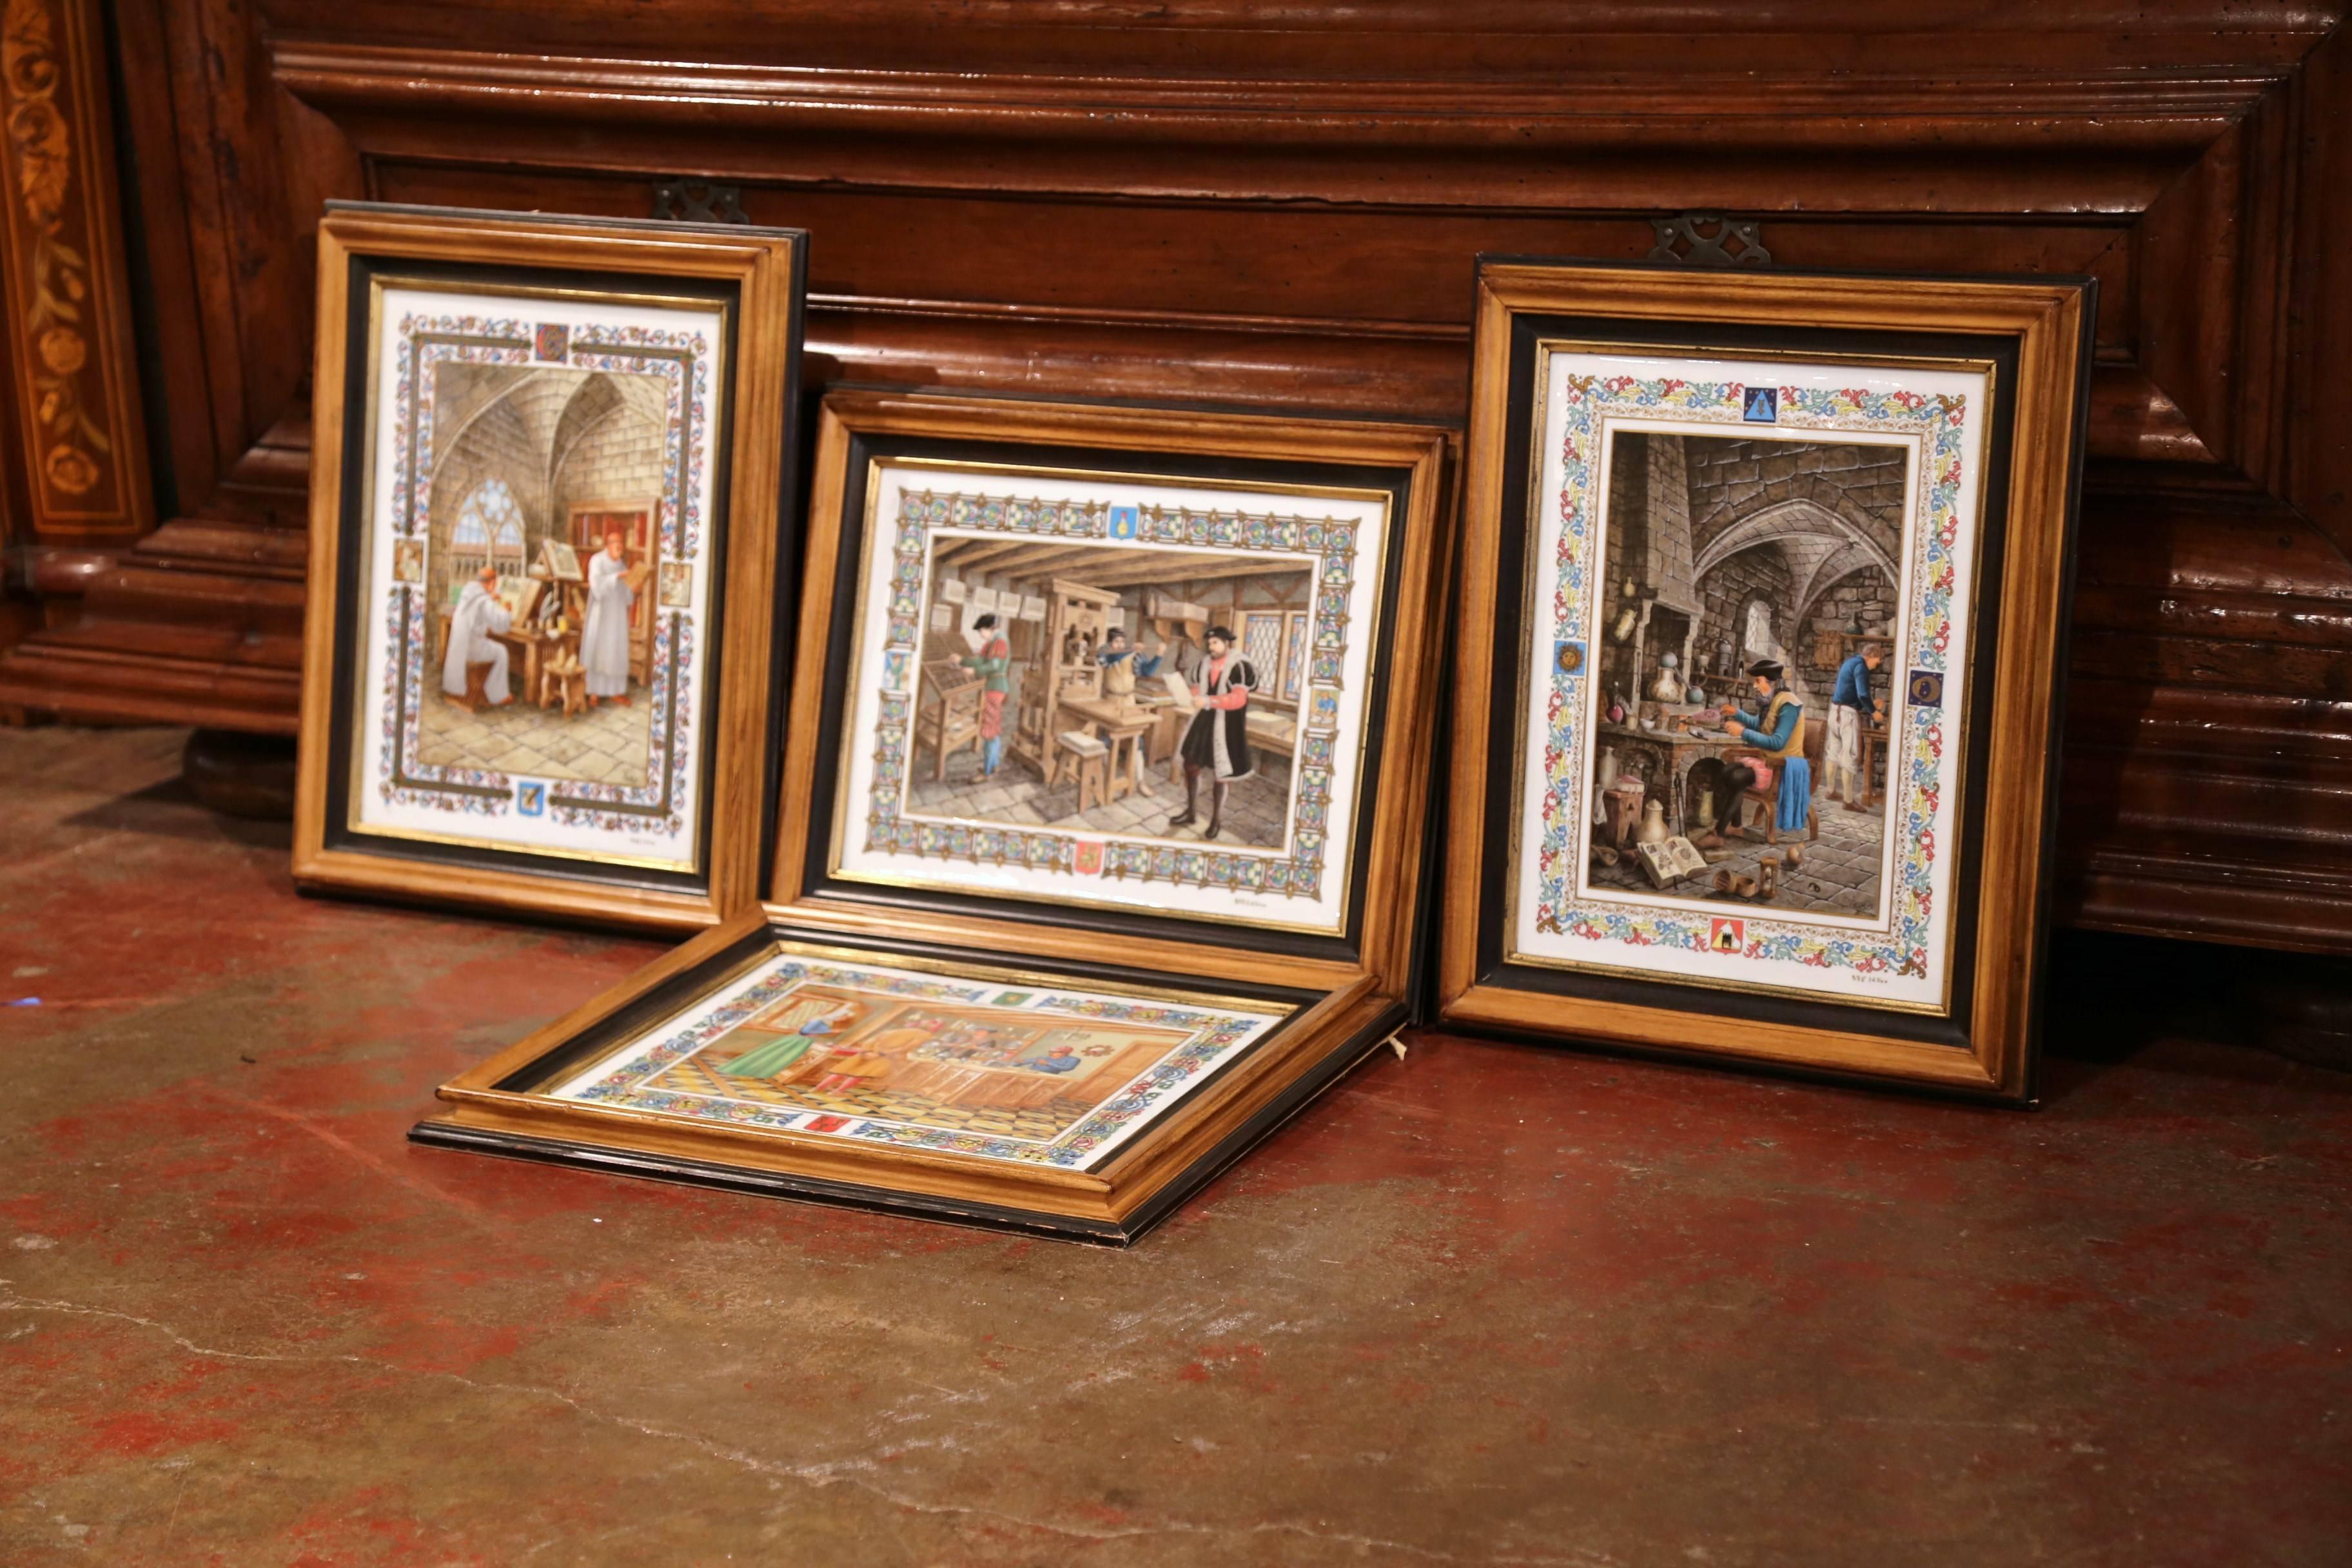 This elegant set of four porcelain plaques depict medieval work activities. Crafted in France, circa 1980, each colorful wall plaque illustrates different occupations available during the Middle Ages. The scenes show a goldsmith, jeweler, alchemist